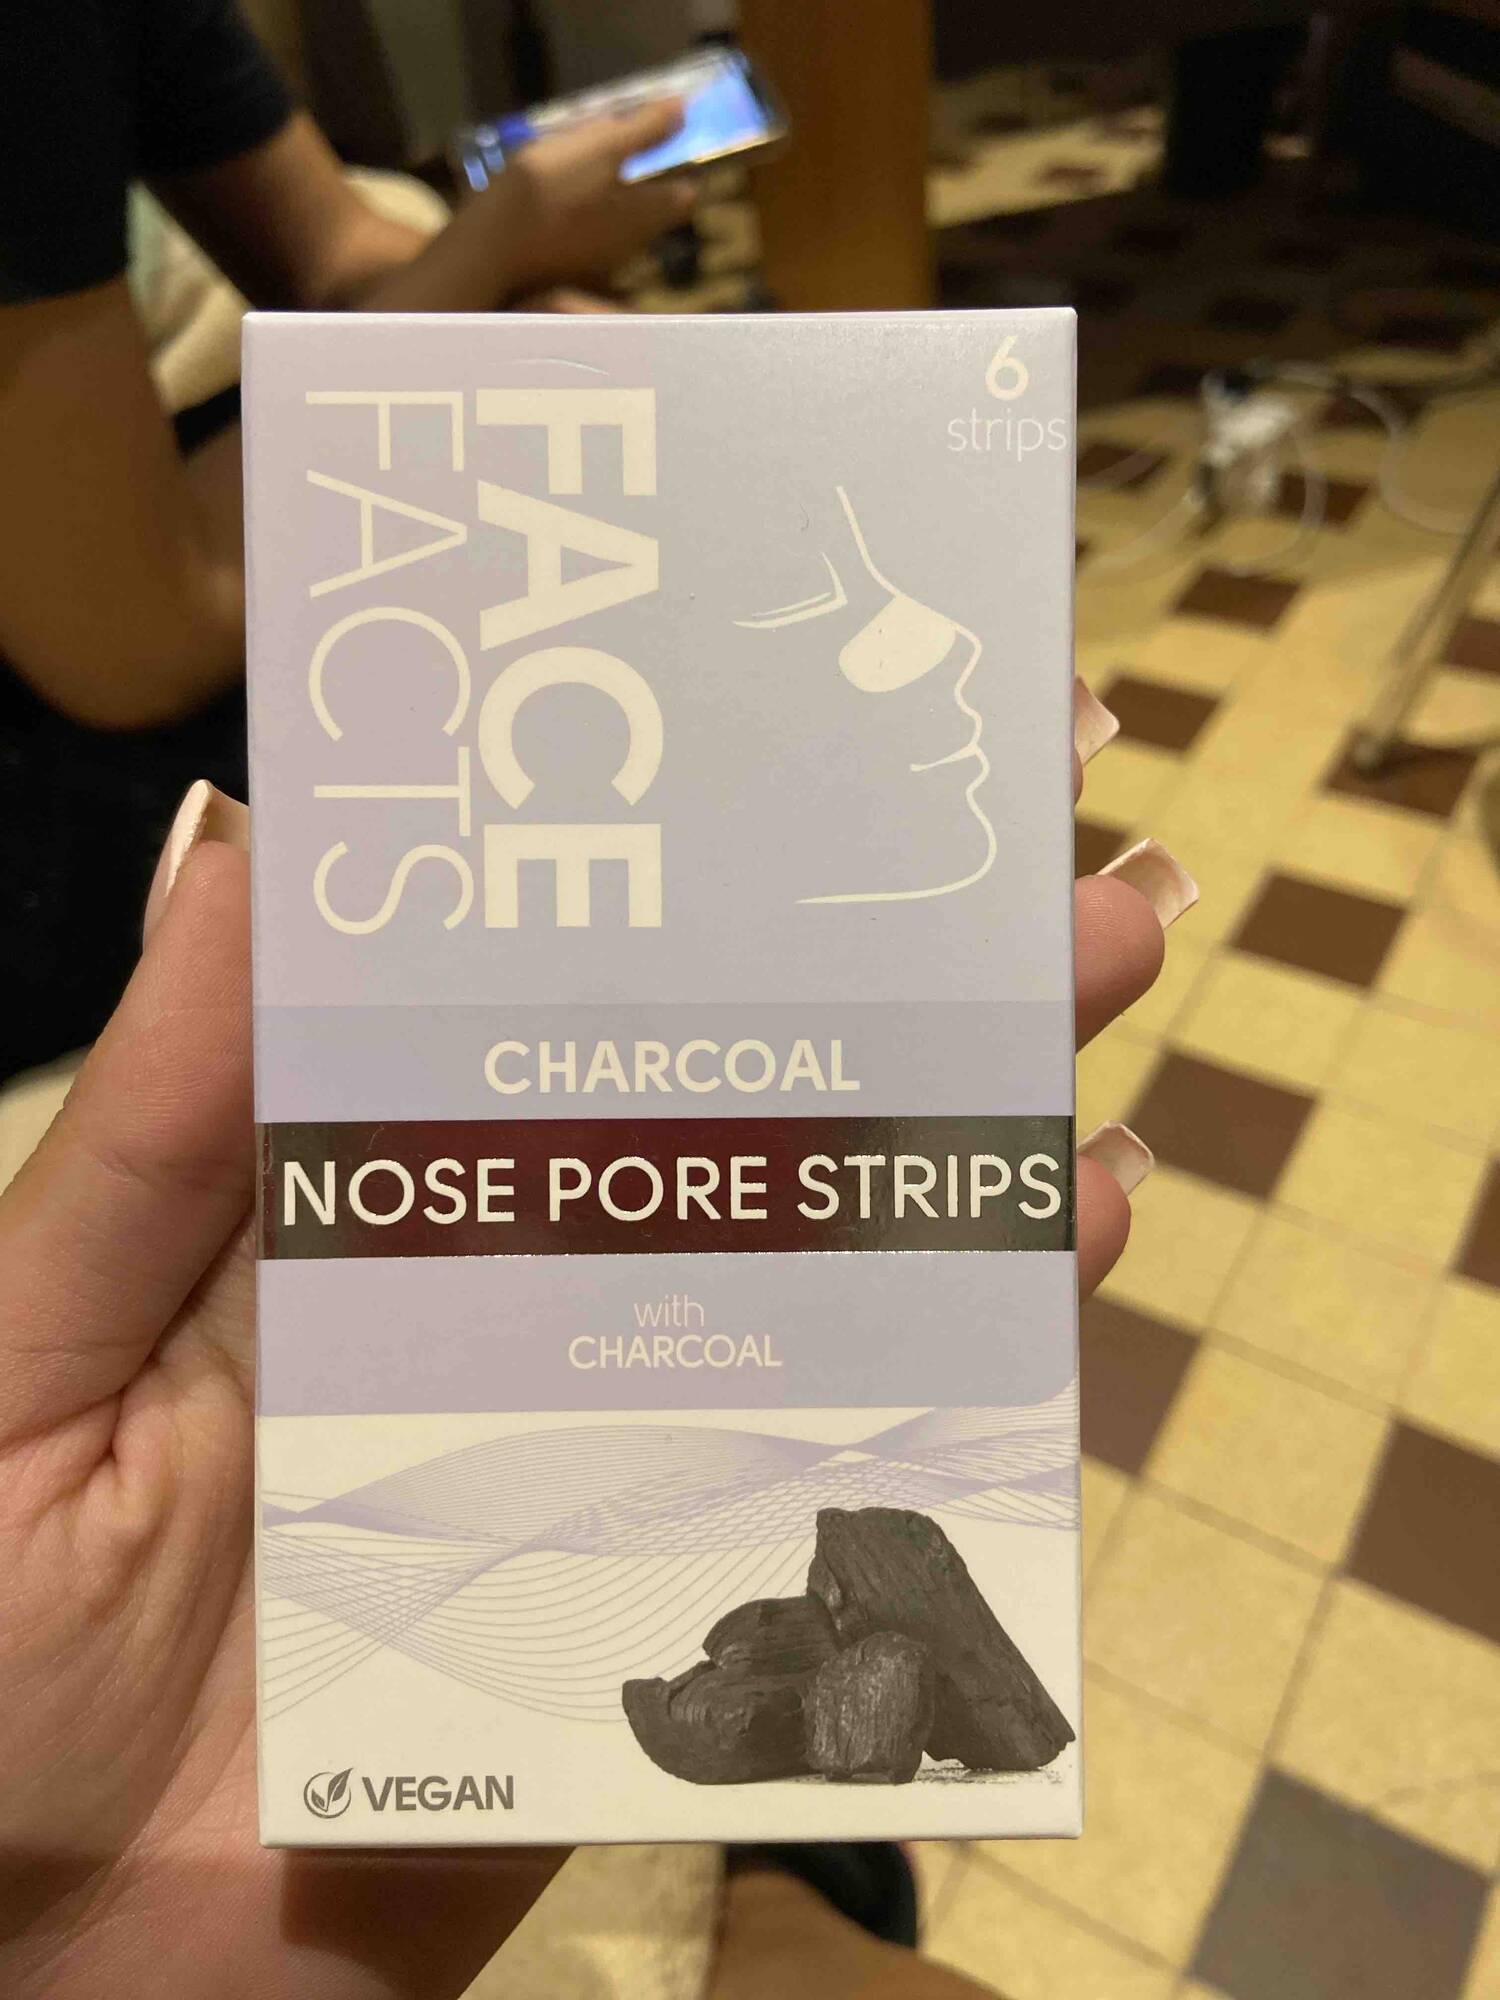 FACE FACTS - Charcoal nose pore strips